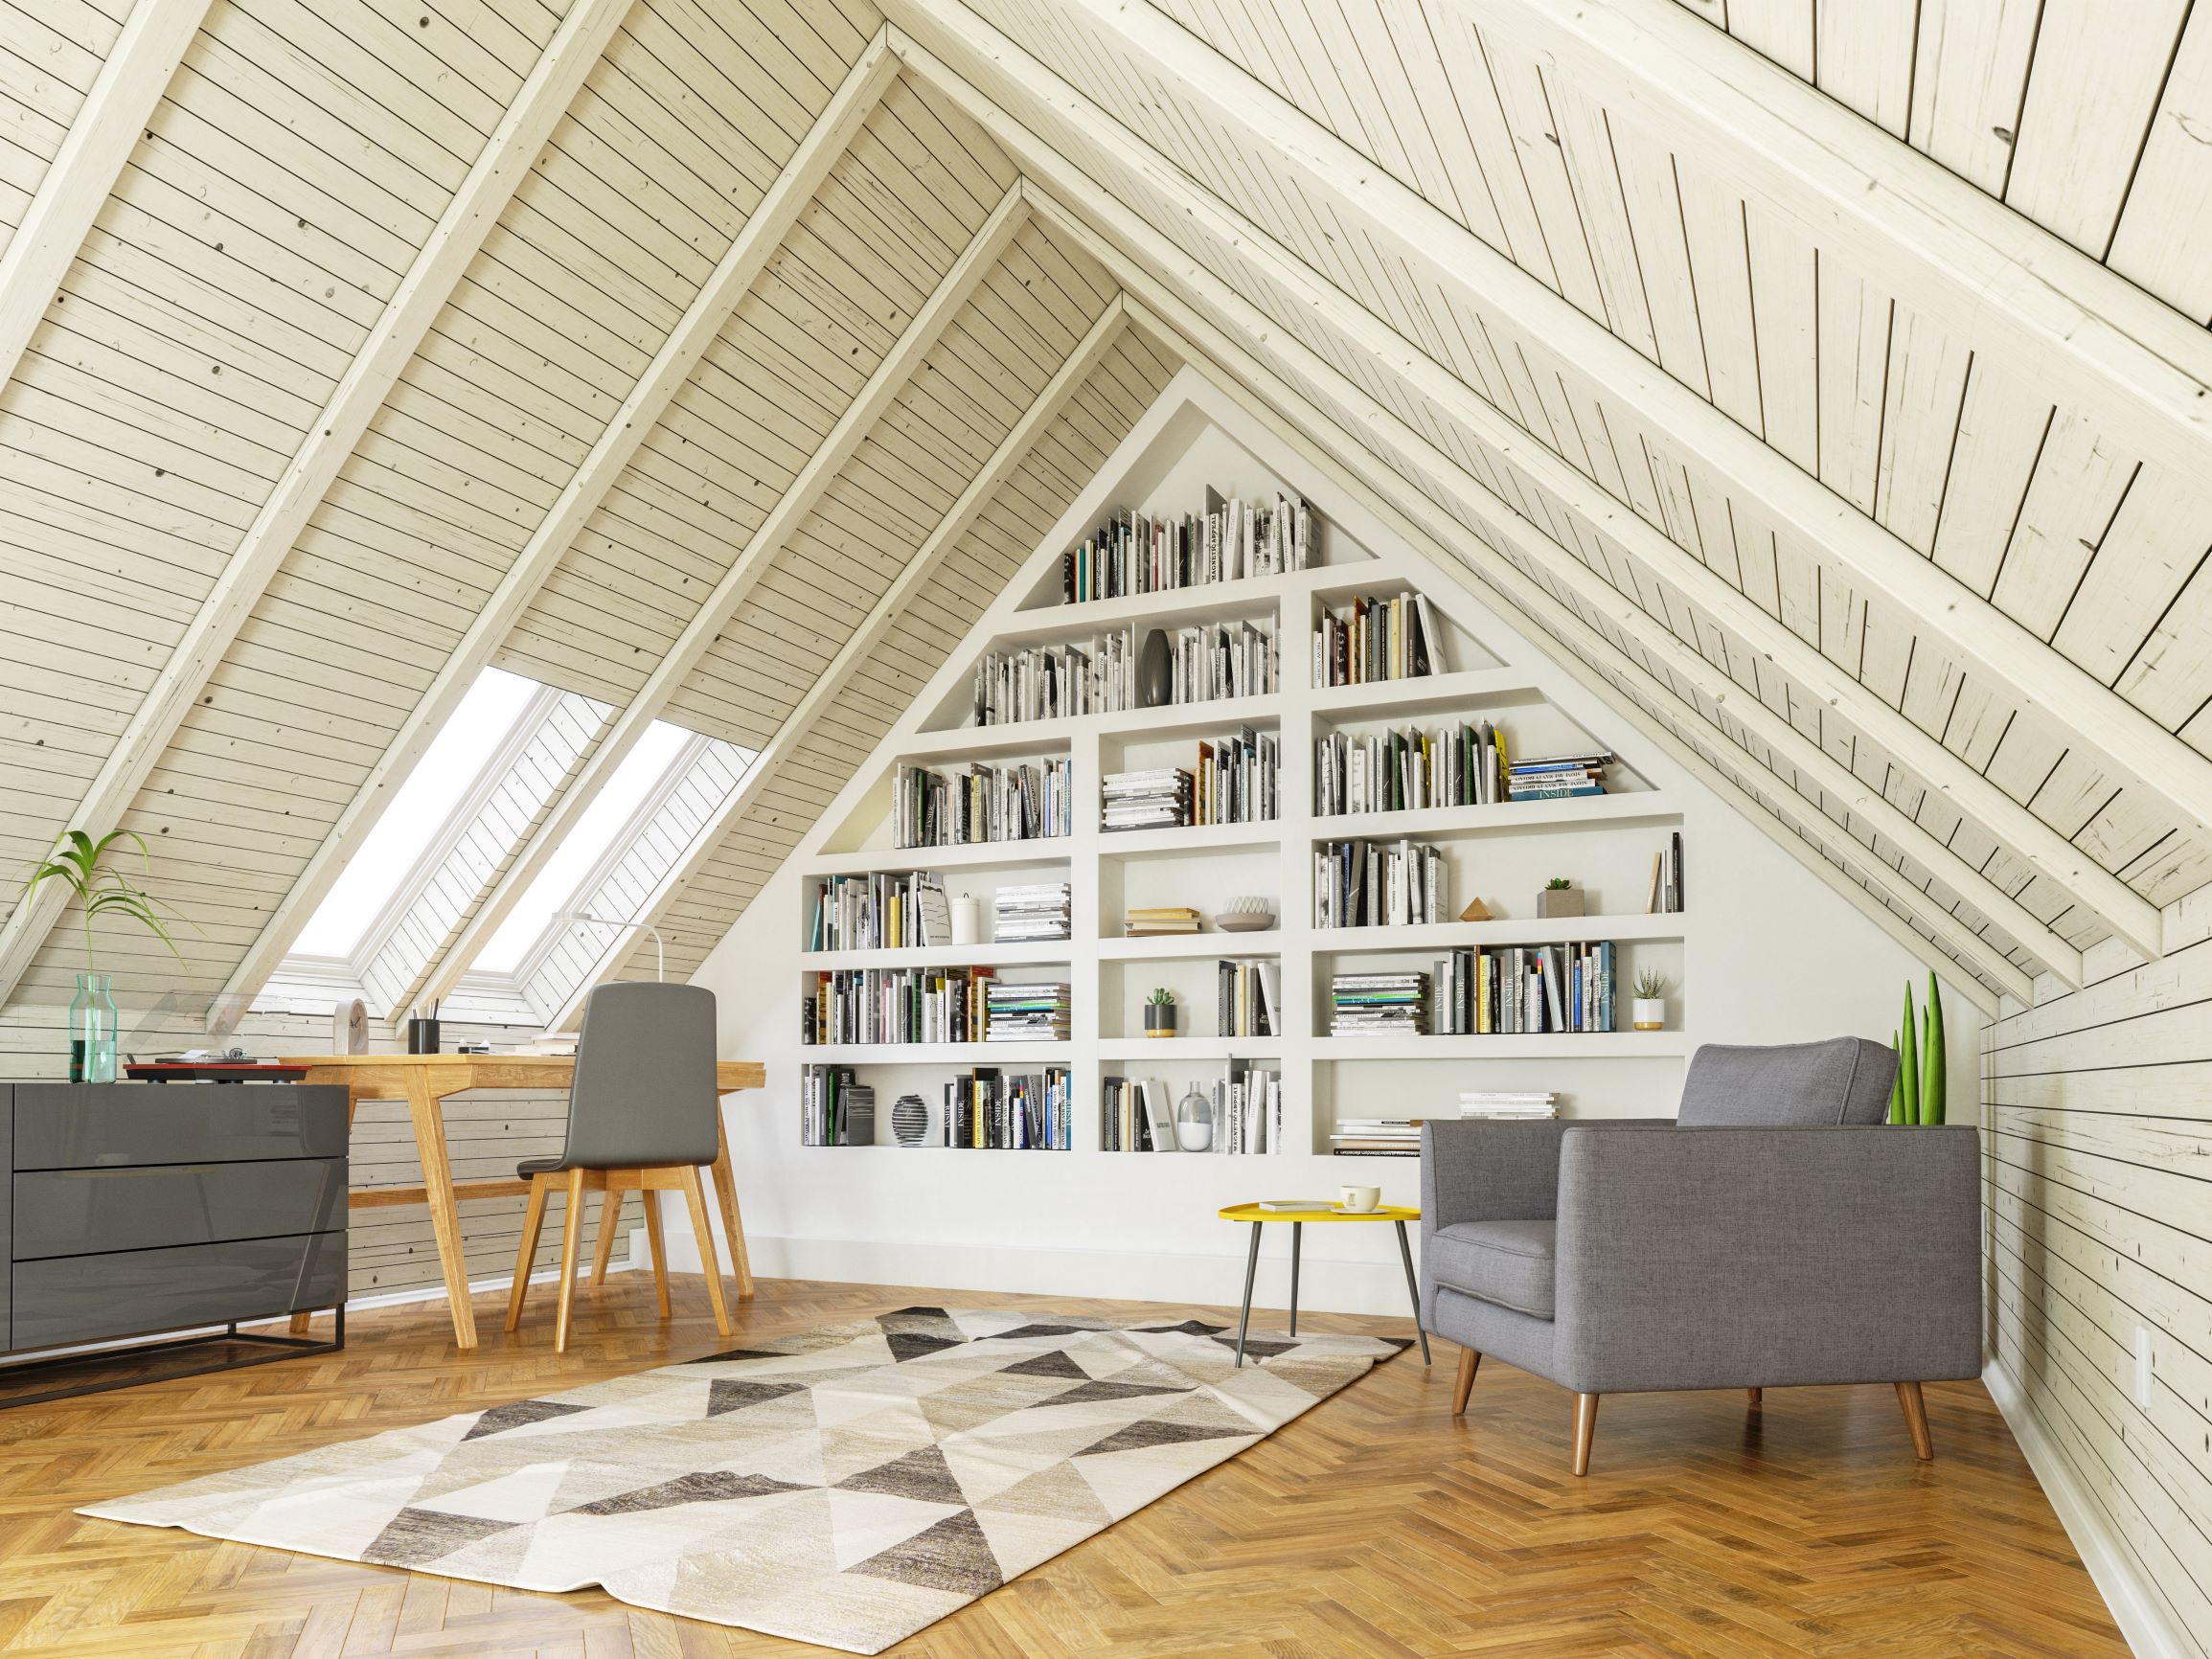 Improve attic insulation with new windows and doors. This image is of an attic that is being used as a home office or library.